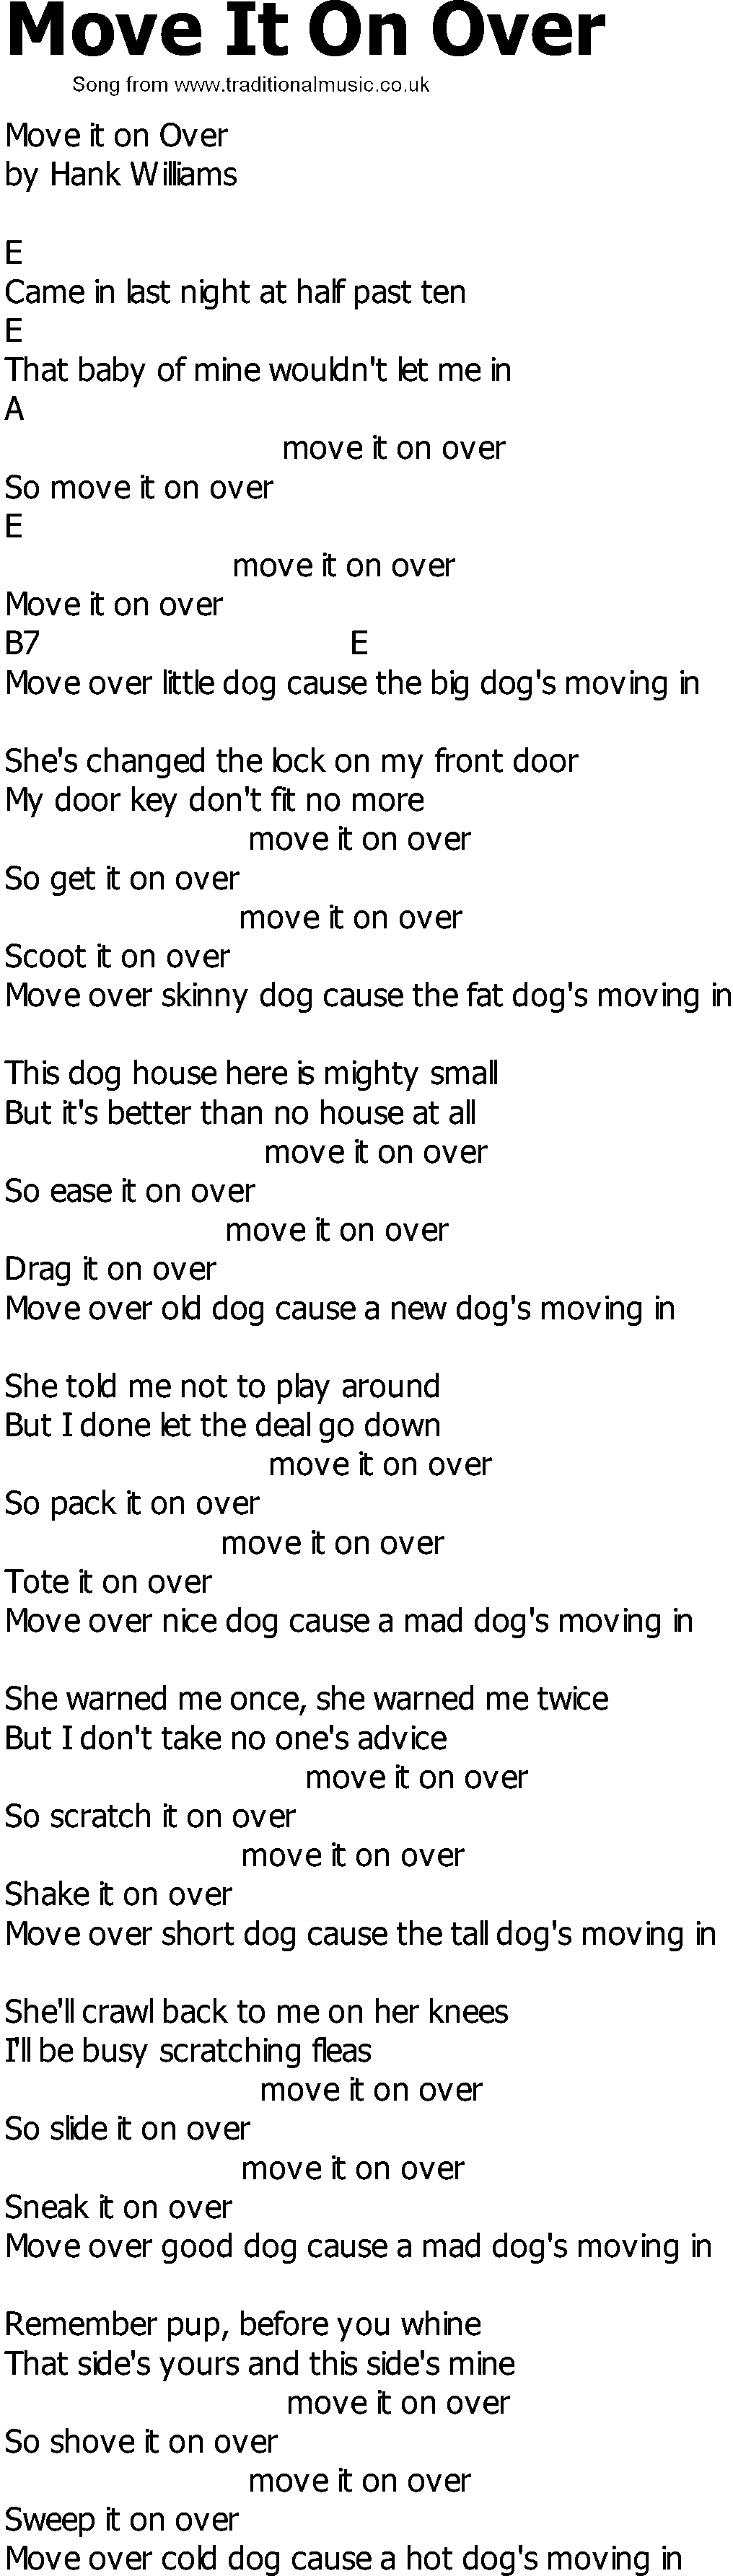 Old Country song lyrics with chords - Move It On Over